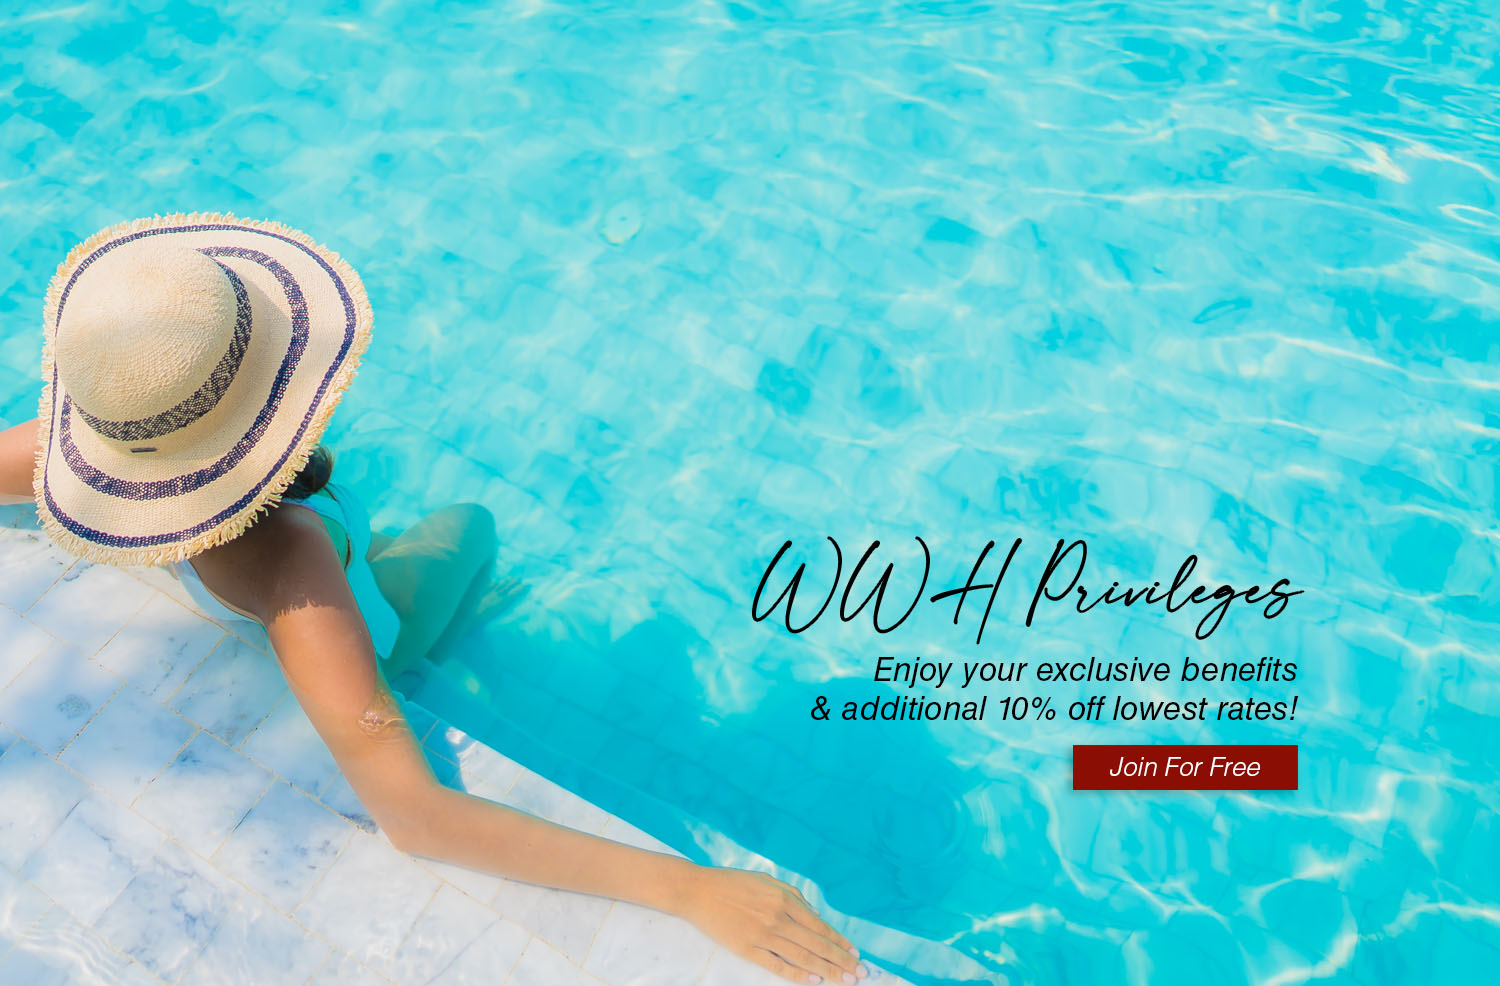 Subscribe To WWH Privileges and enjoy exclusive perks!  | Hotel Boss Singapore